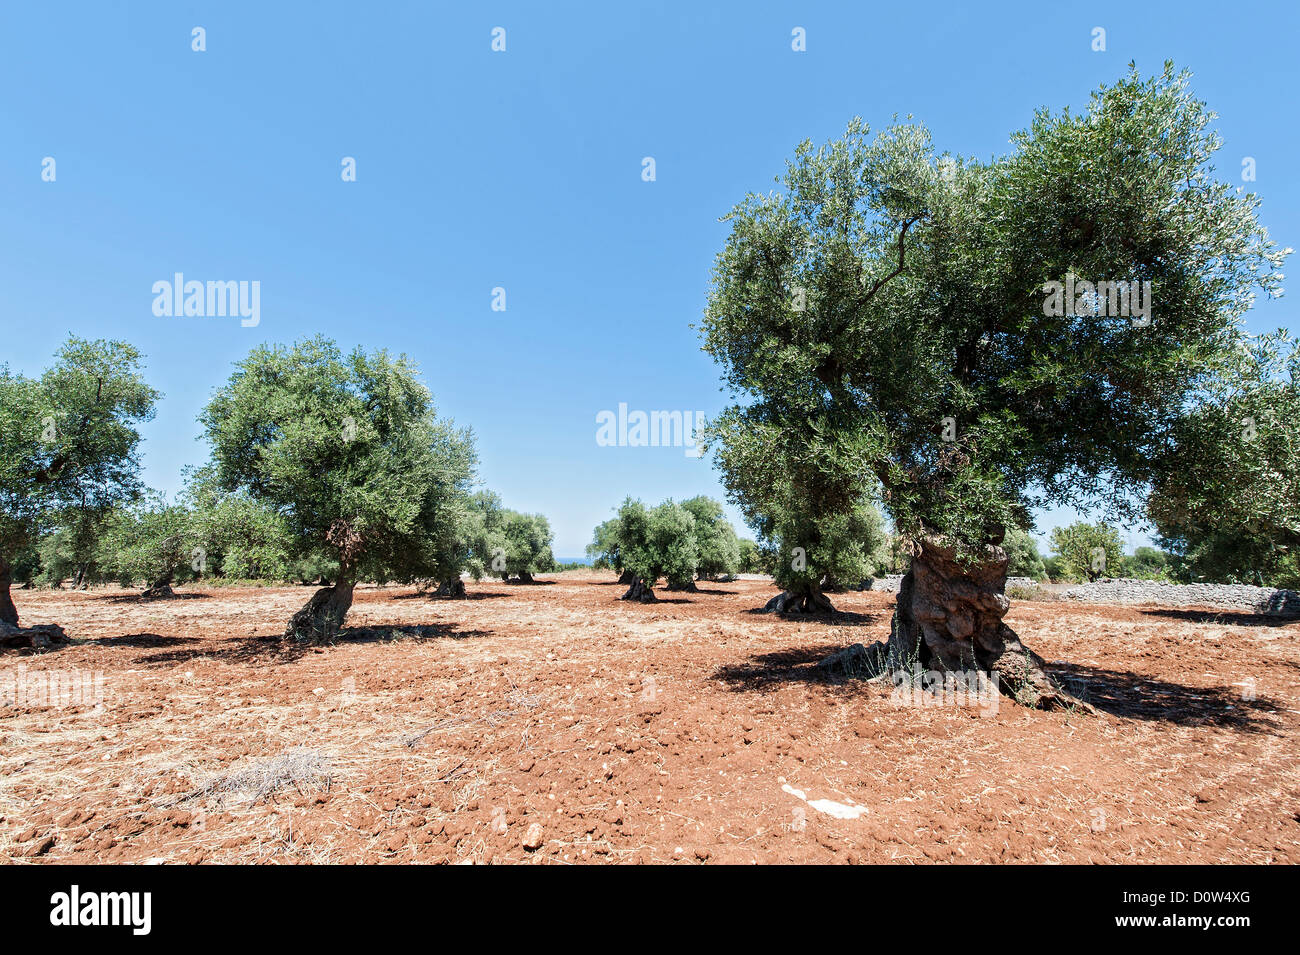 Italy, Puglia, Europe, Olive trees, old, trees, Olive, agriculture Stock Photo